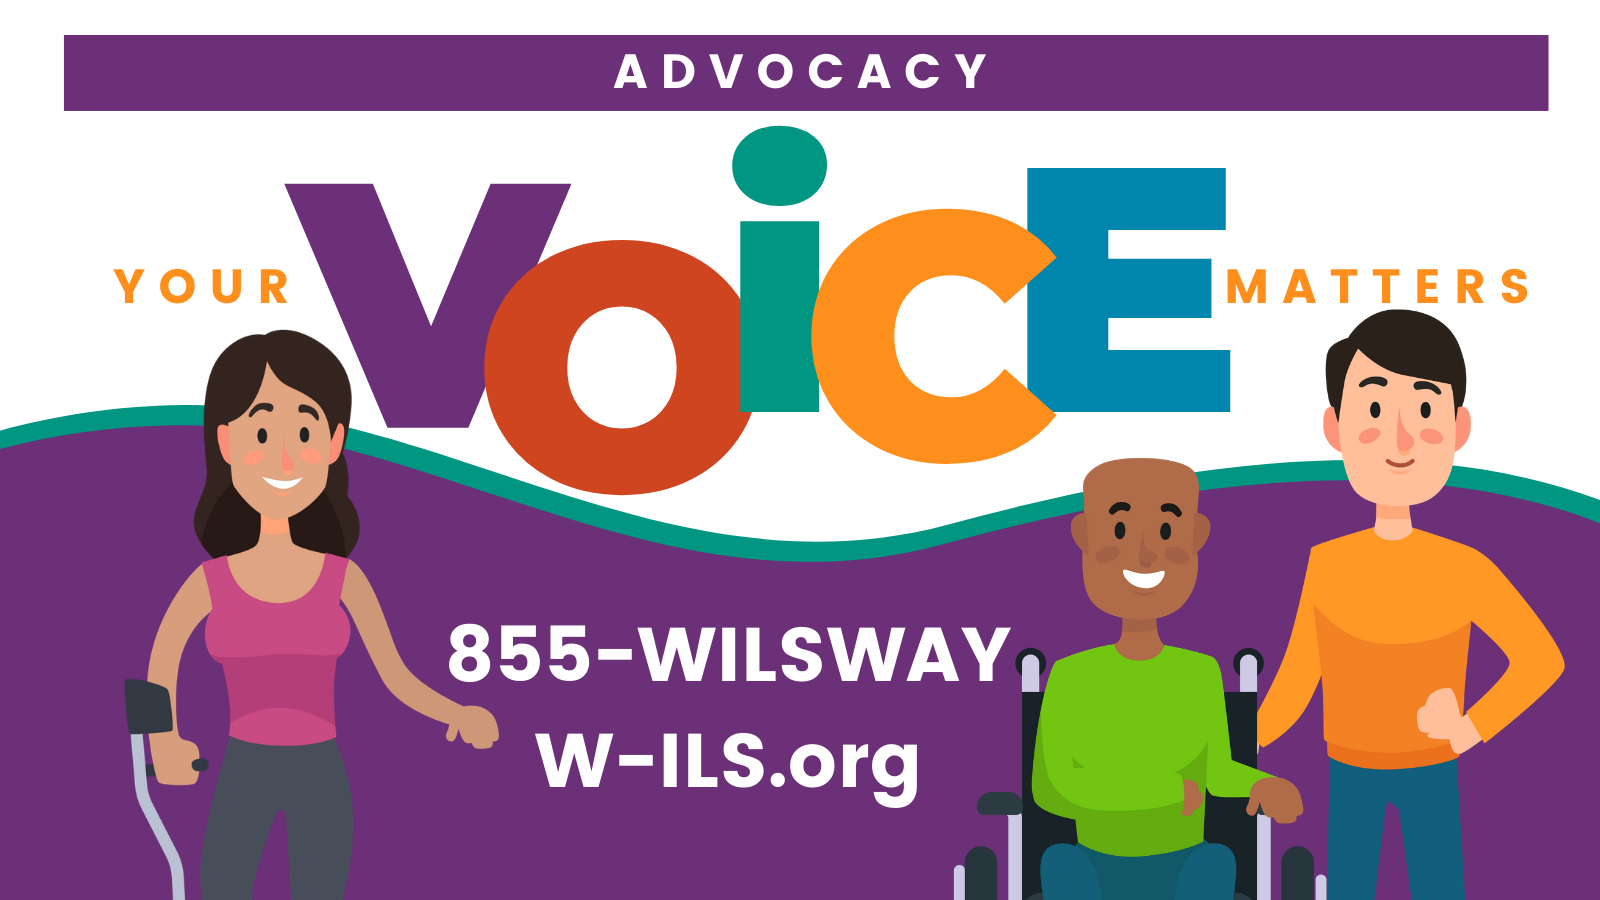 Advocacy.  Your voice matters.  Call 855-WILSWAY or visit W-ILS.org